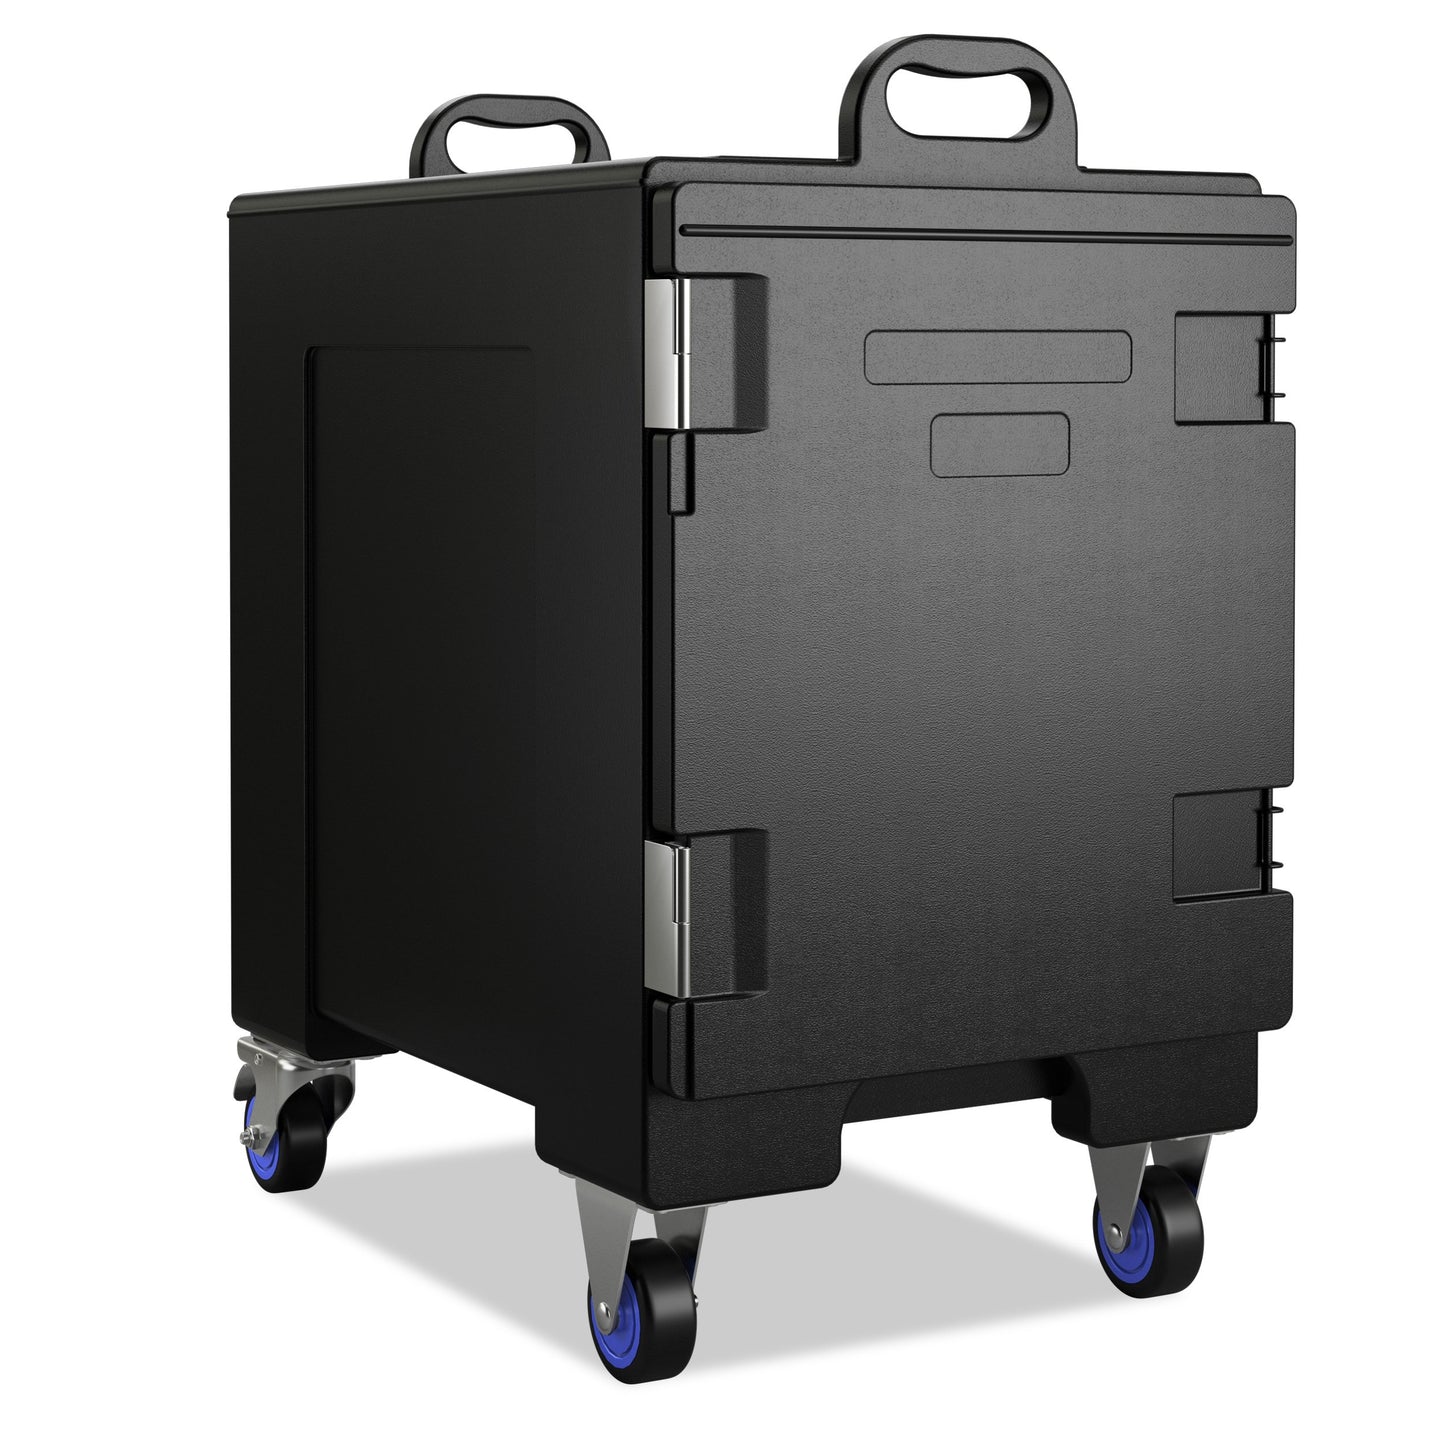 81 Quart Capacity End-loading Insulated Food Pan Carrier with Wheels, Black